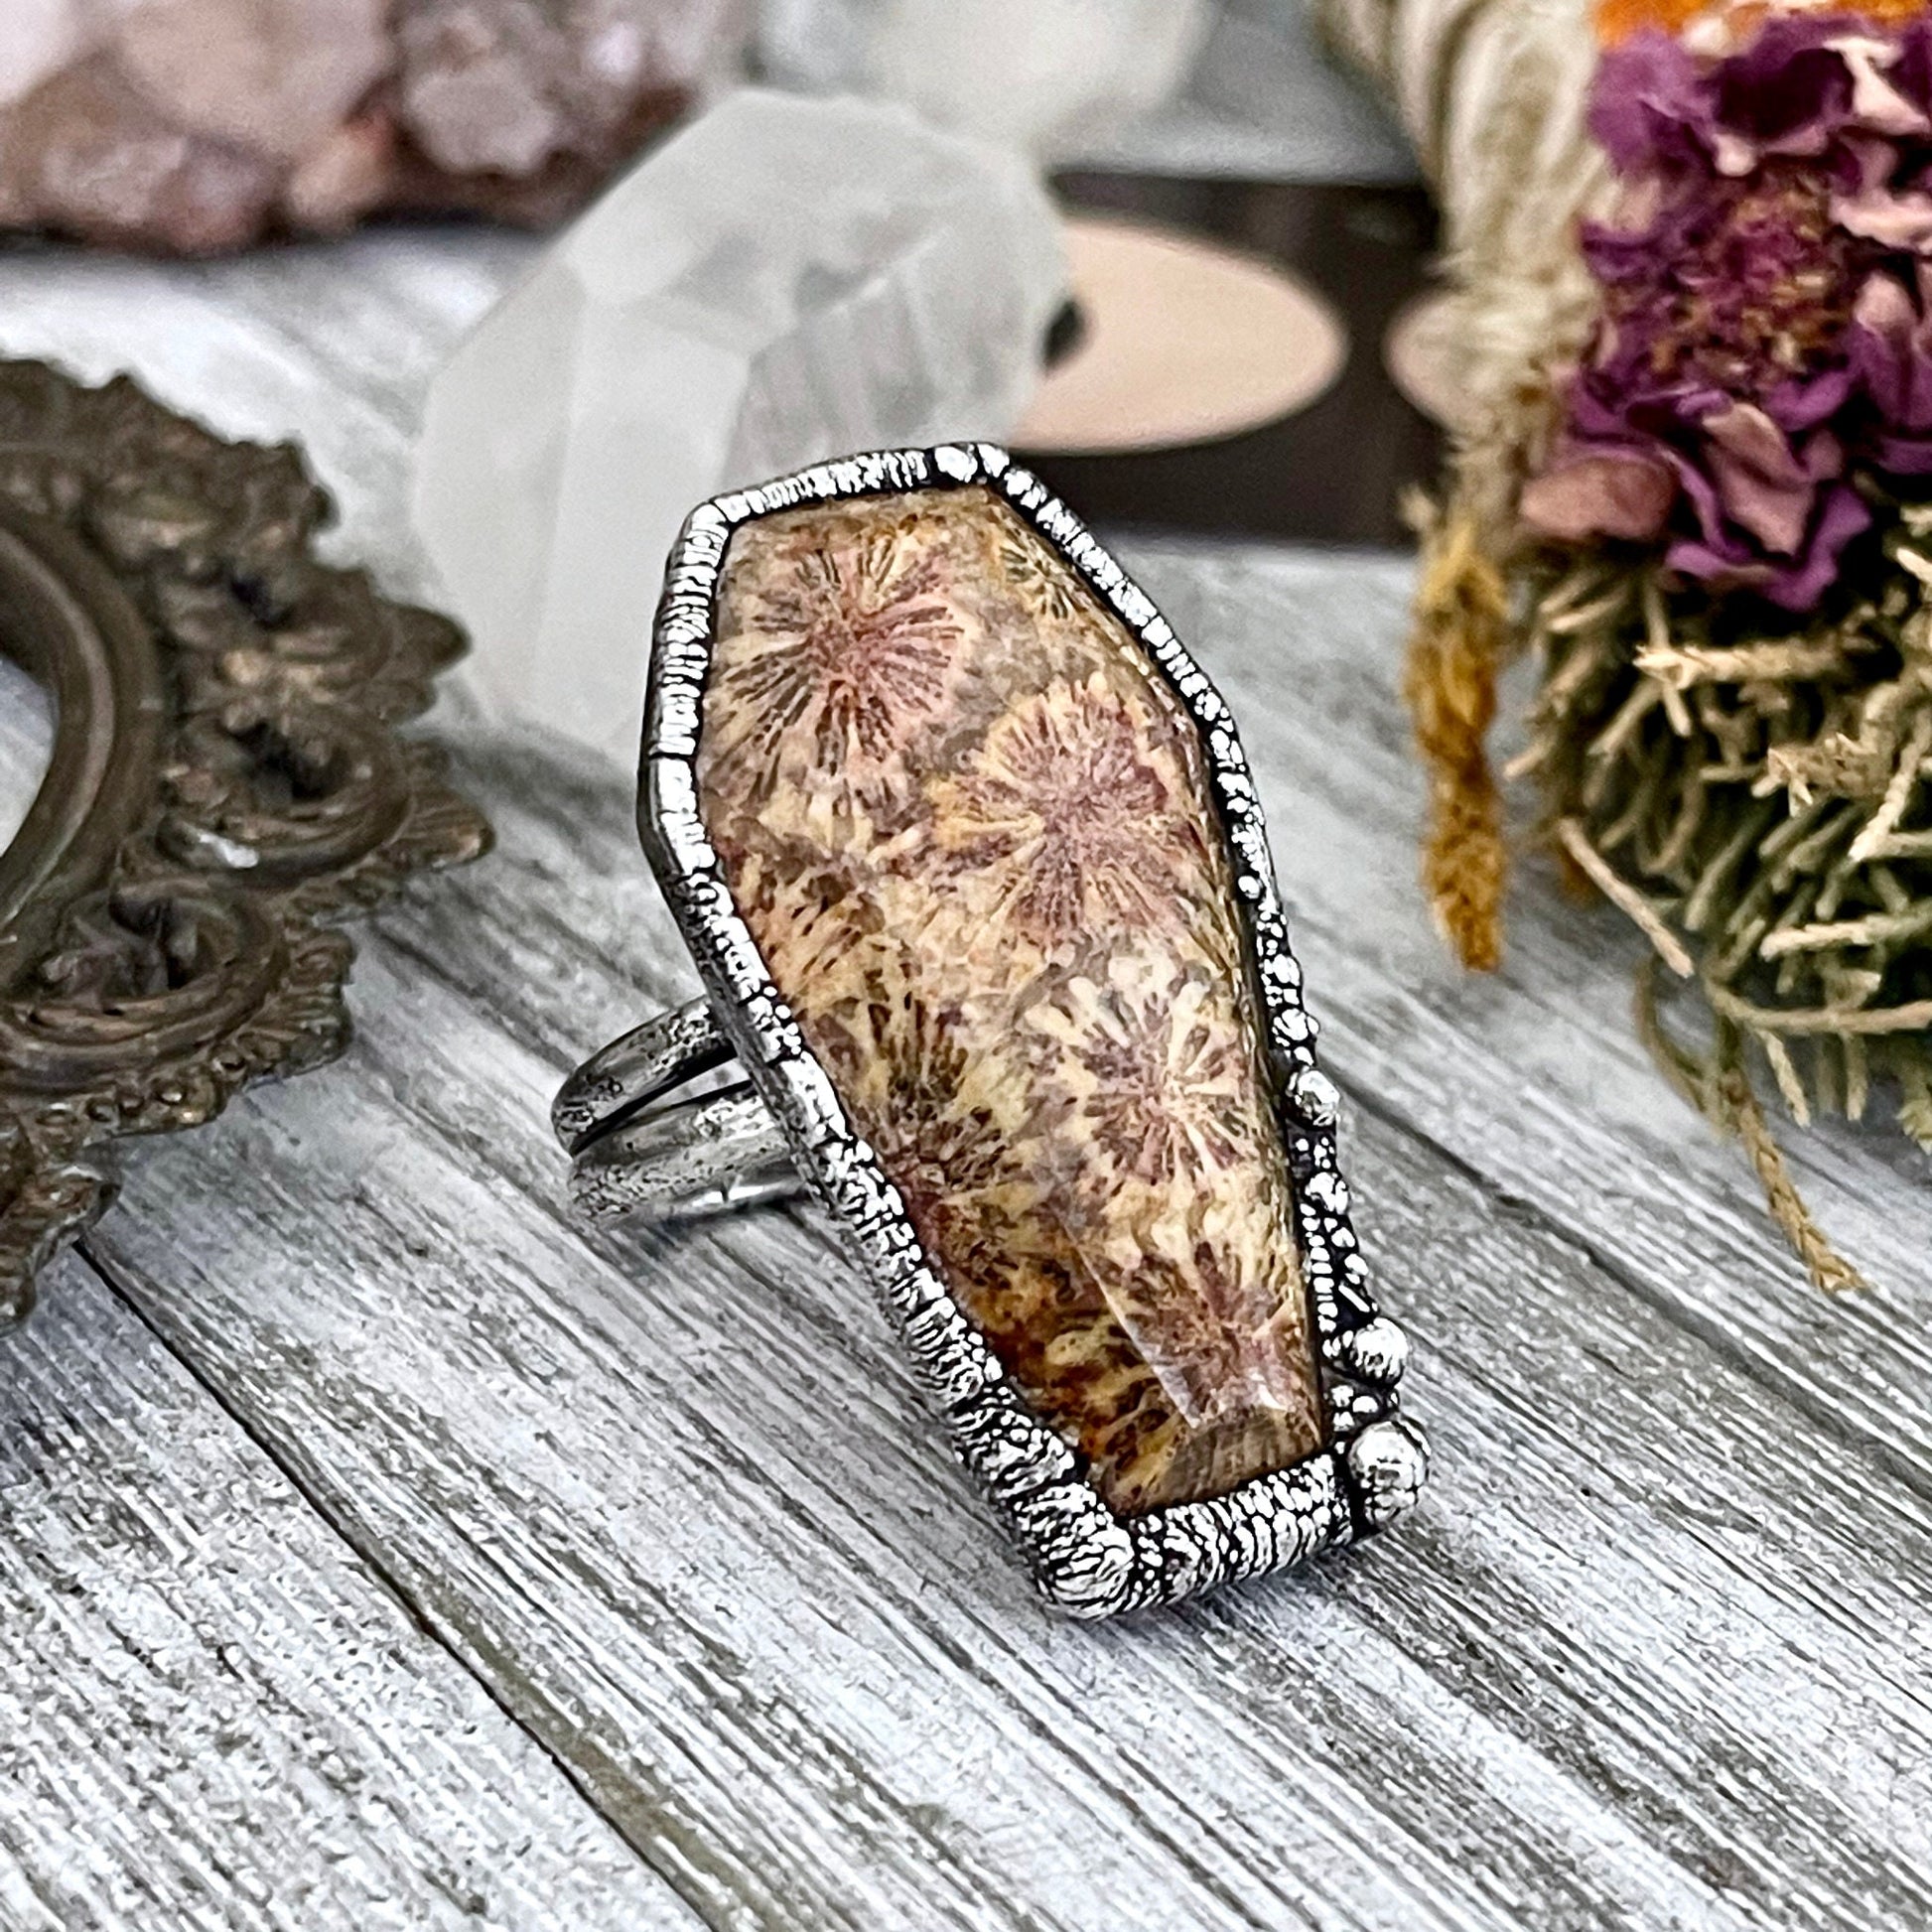 Size 8 Large Fossilized Coral Coffin Statement Ring in Fine Silver / Foxlark Collection - One of a Kind - Foxlark Crystal Jewelry